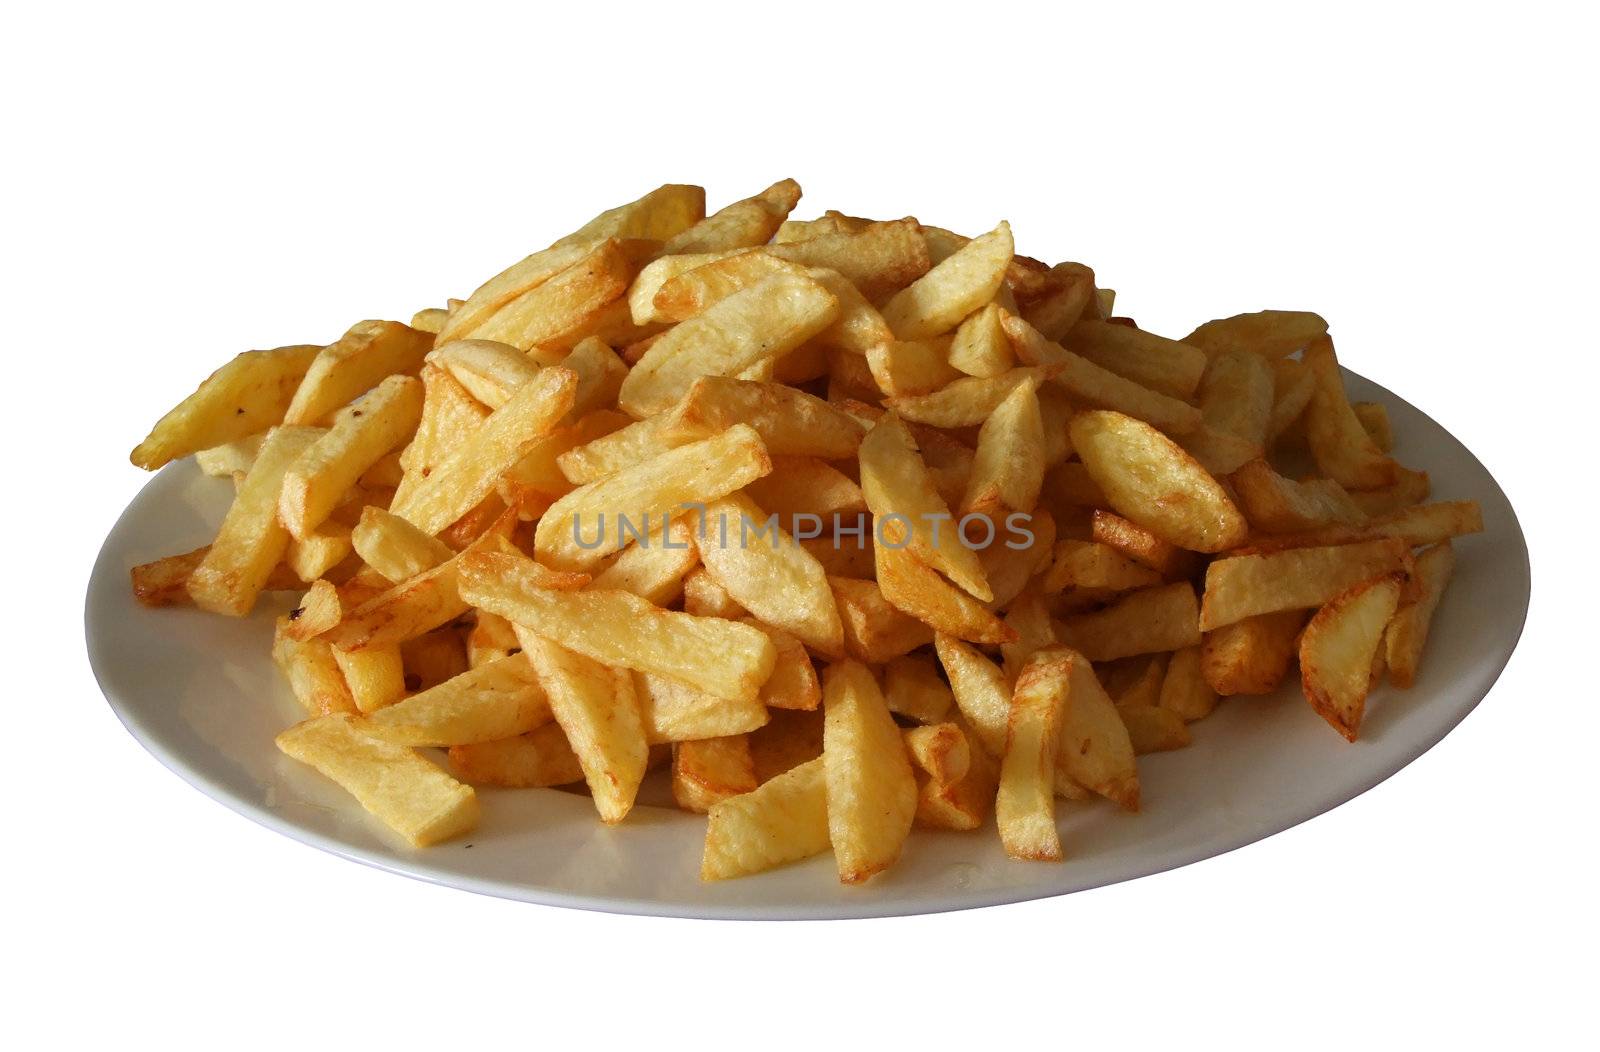 franch frites on a plate, isolated with clipping path